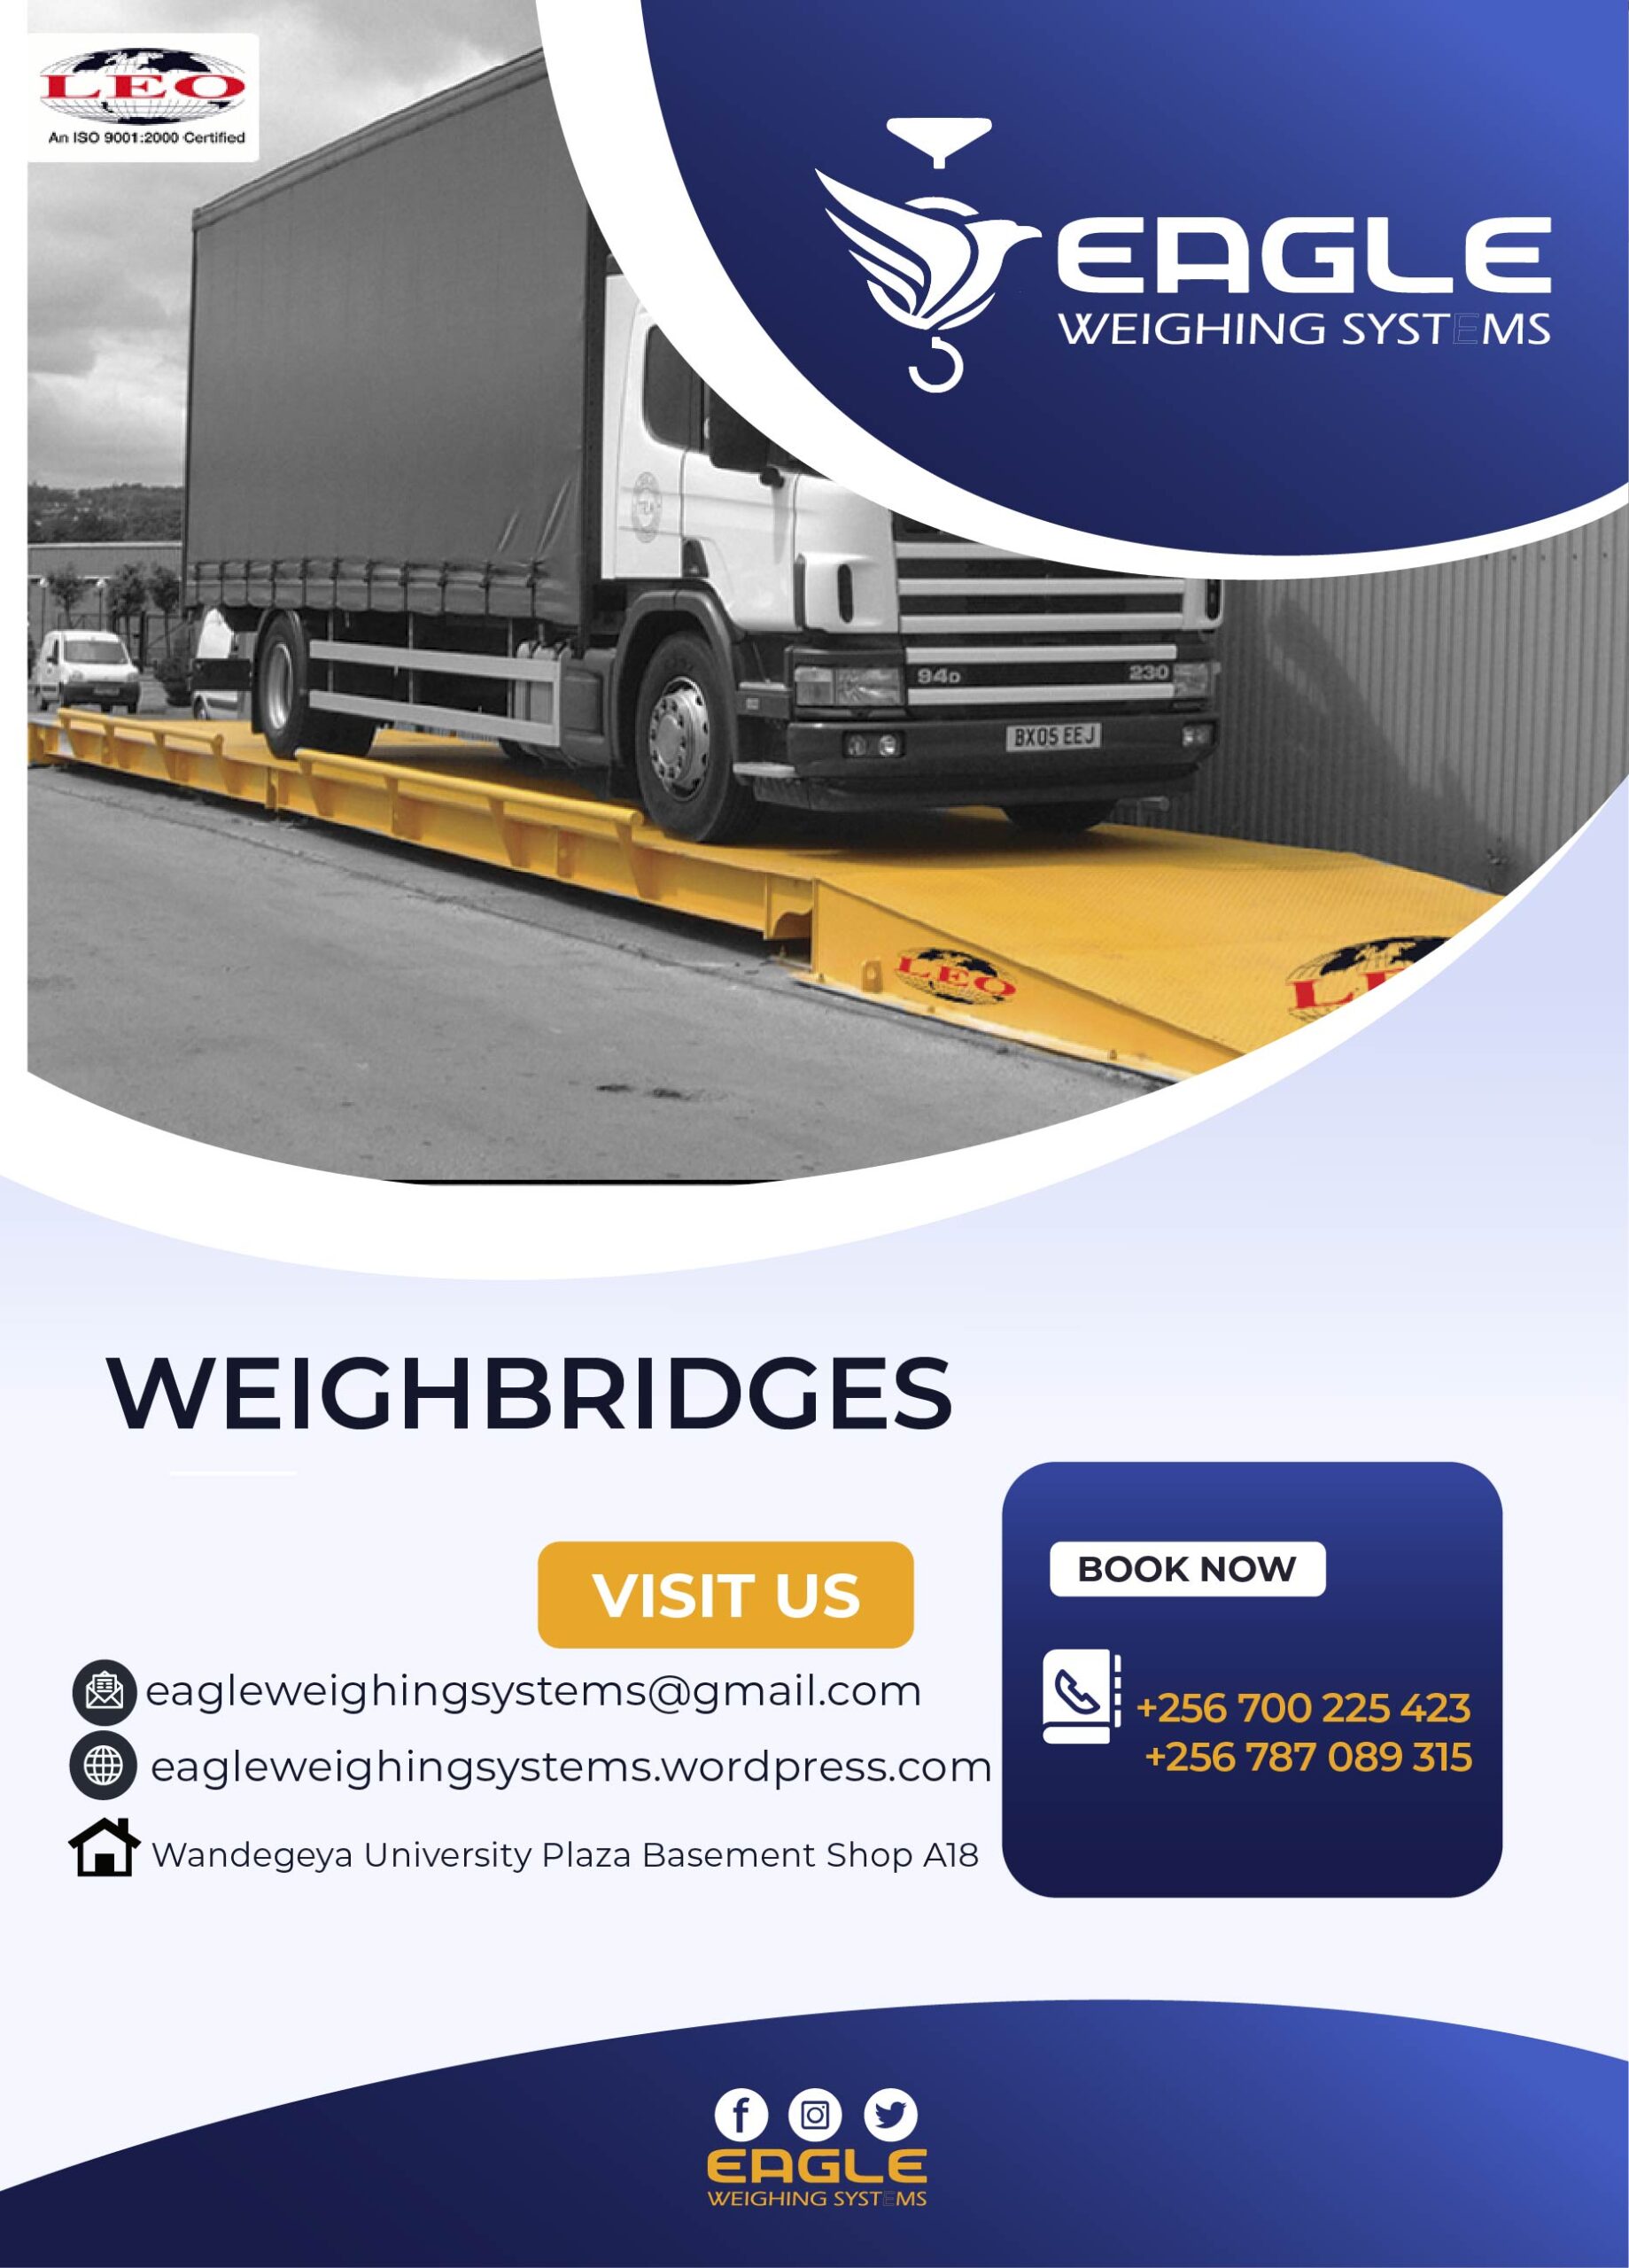 Weighbridge Suppliers in Uganda offers a range of high-quality weighbridges designed for accuracy, durability, and reliability.